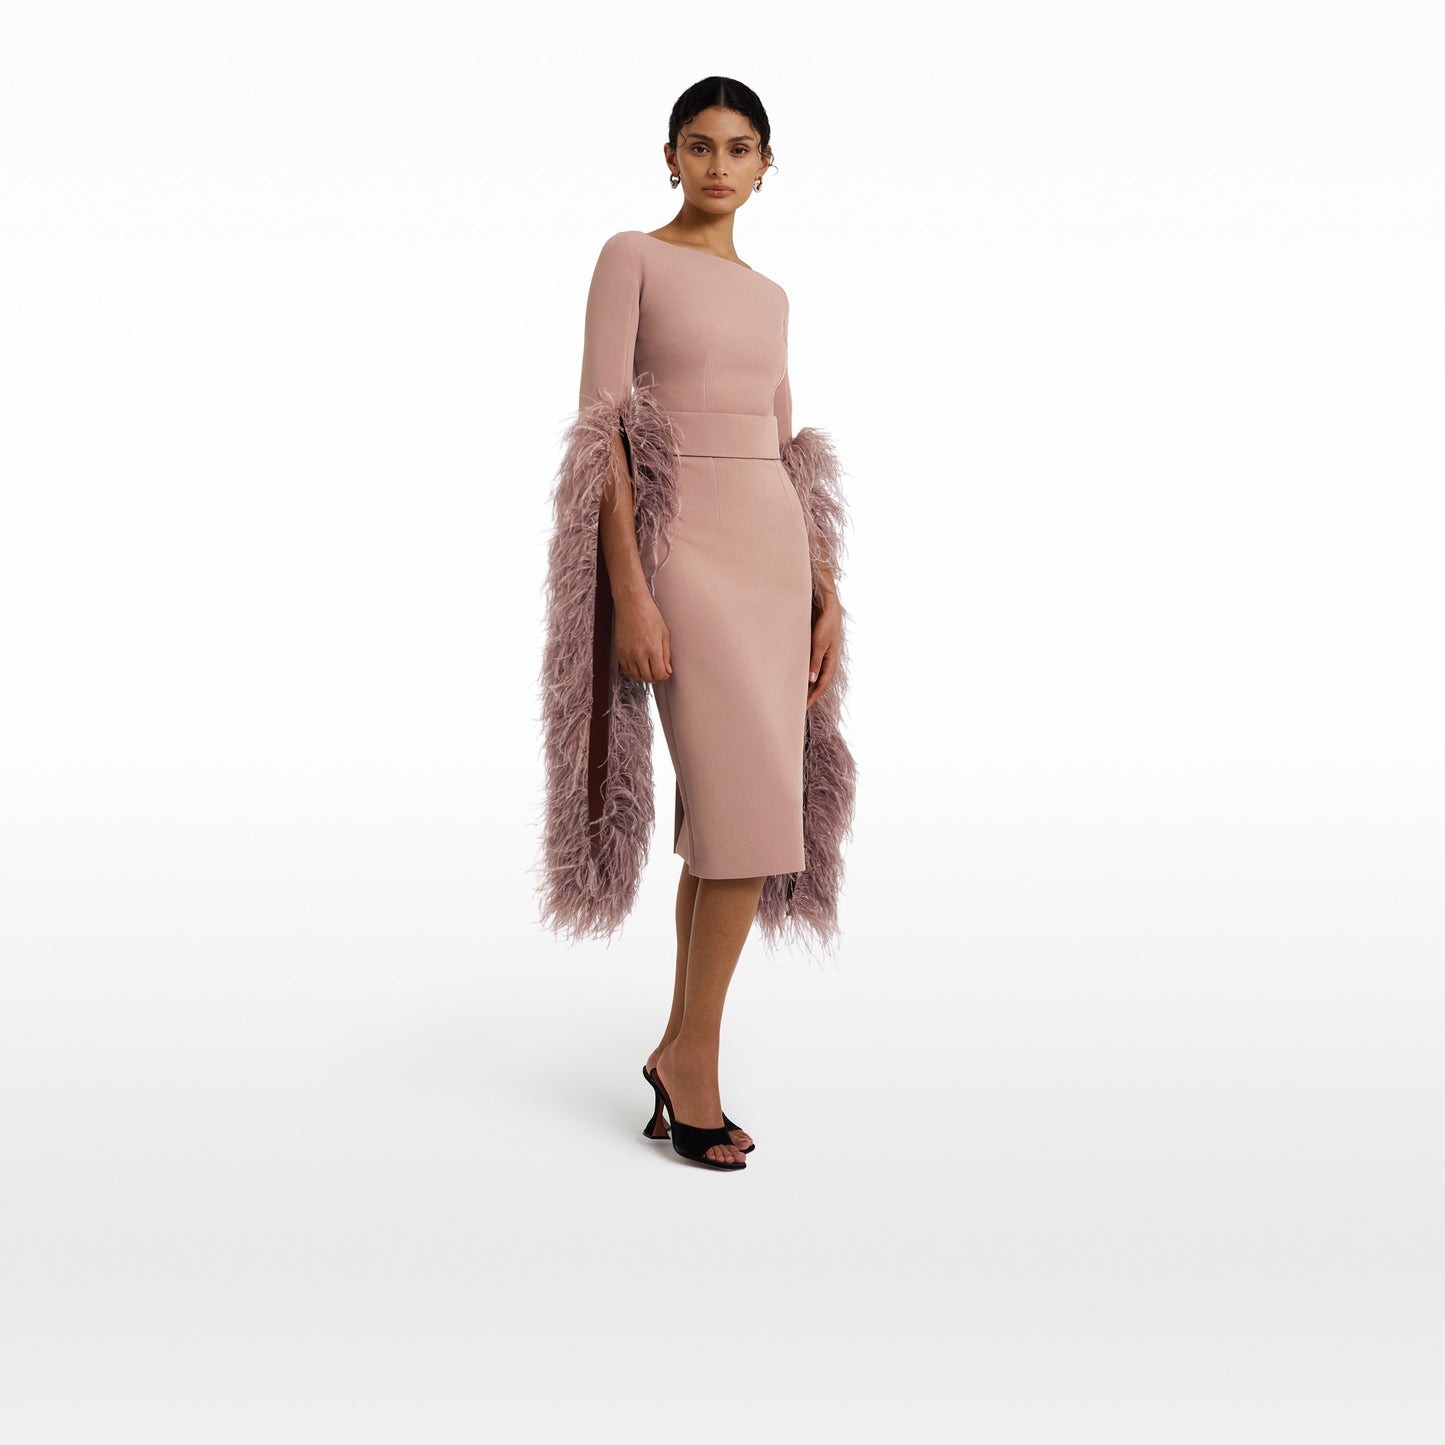 Octavia Dusty Pink Feather-Trimmed Midi Dress